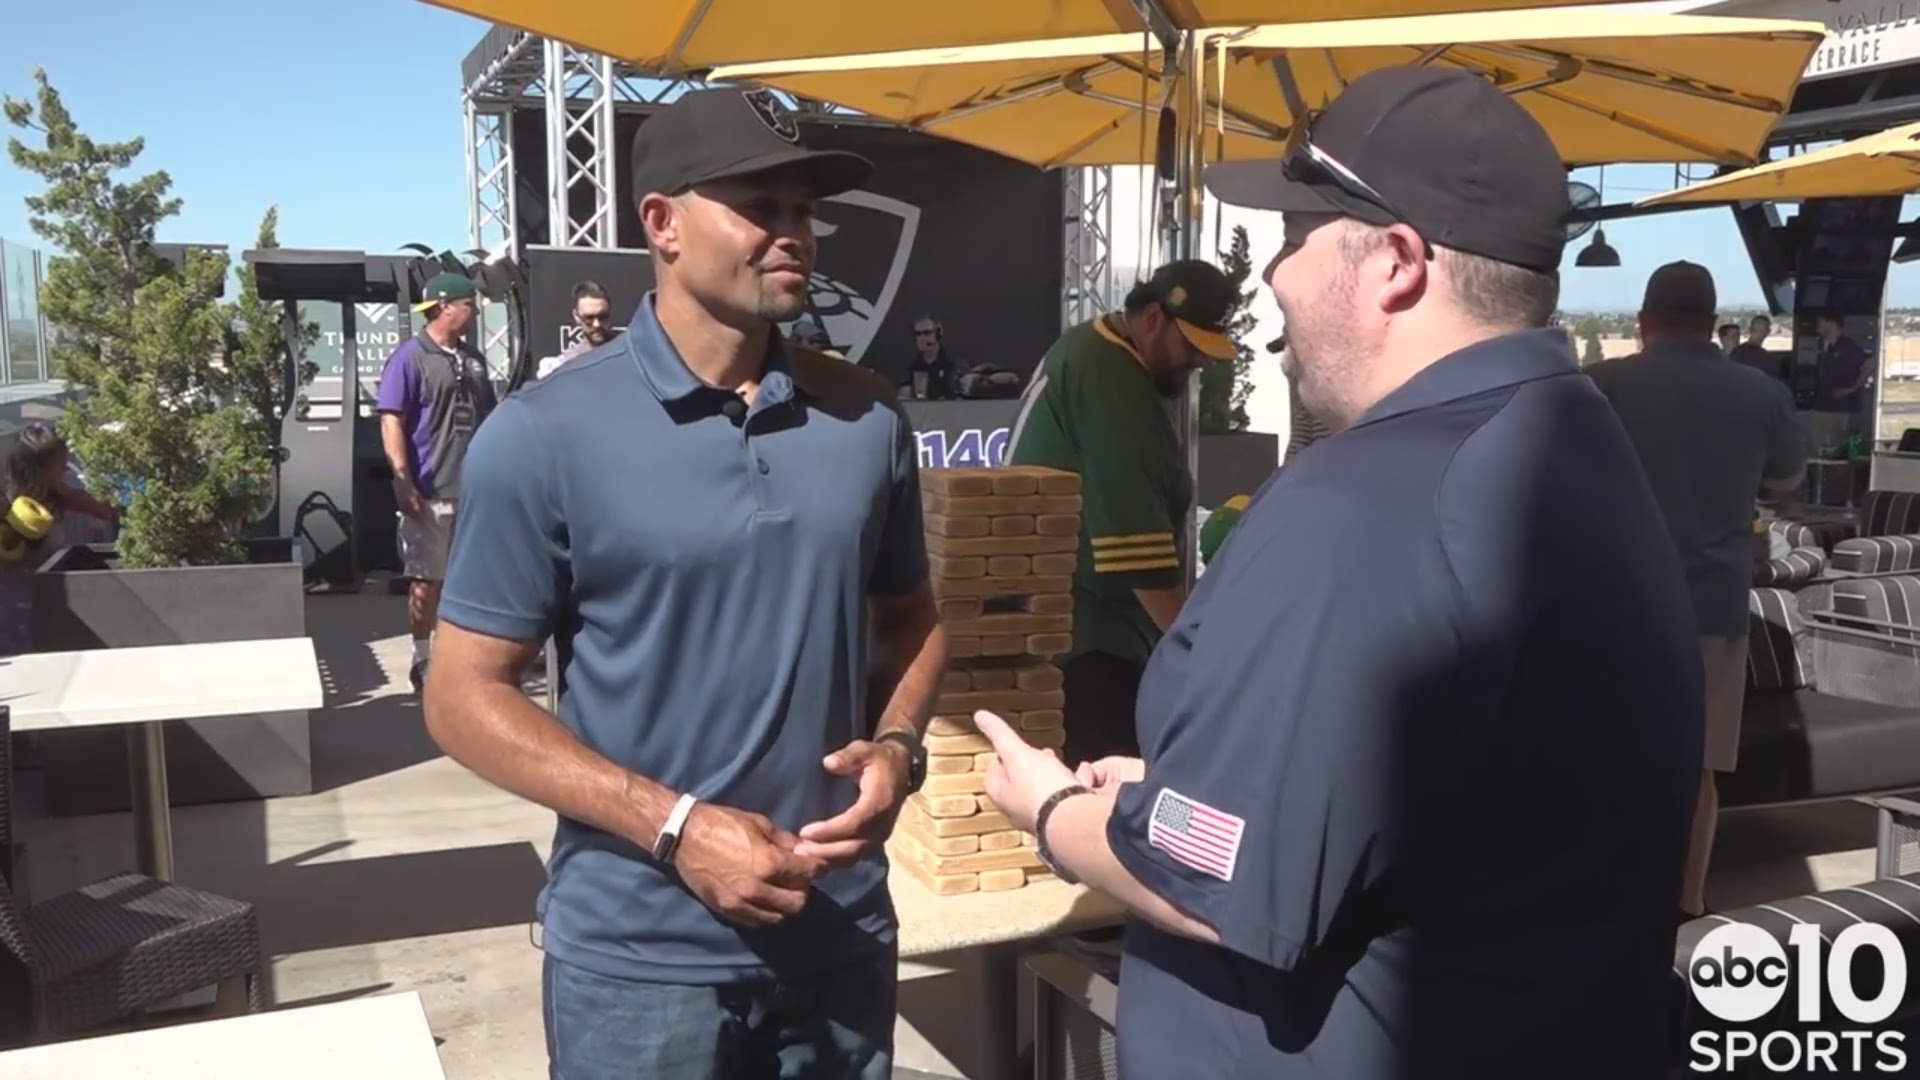 Former A's outfielder turned broadcaster Coco Crisp talks to ABC10's Sean Cunningham about participating in Sports 1140's fan event at Top Golf in Roseville, the transition he made from player into the analyst role and the bright future of Major League Baseball in Oakland.